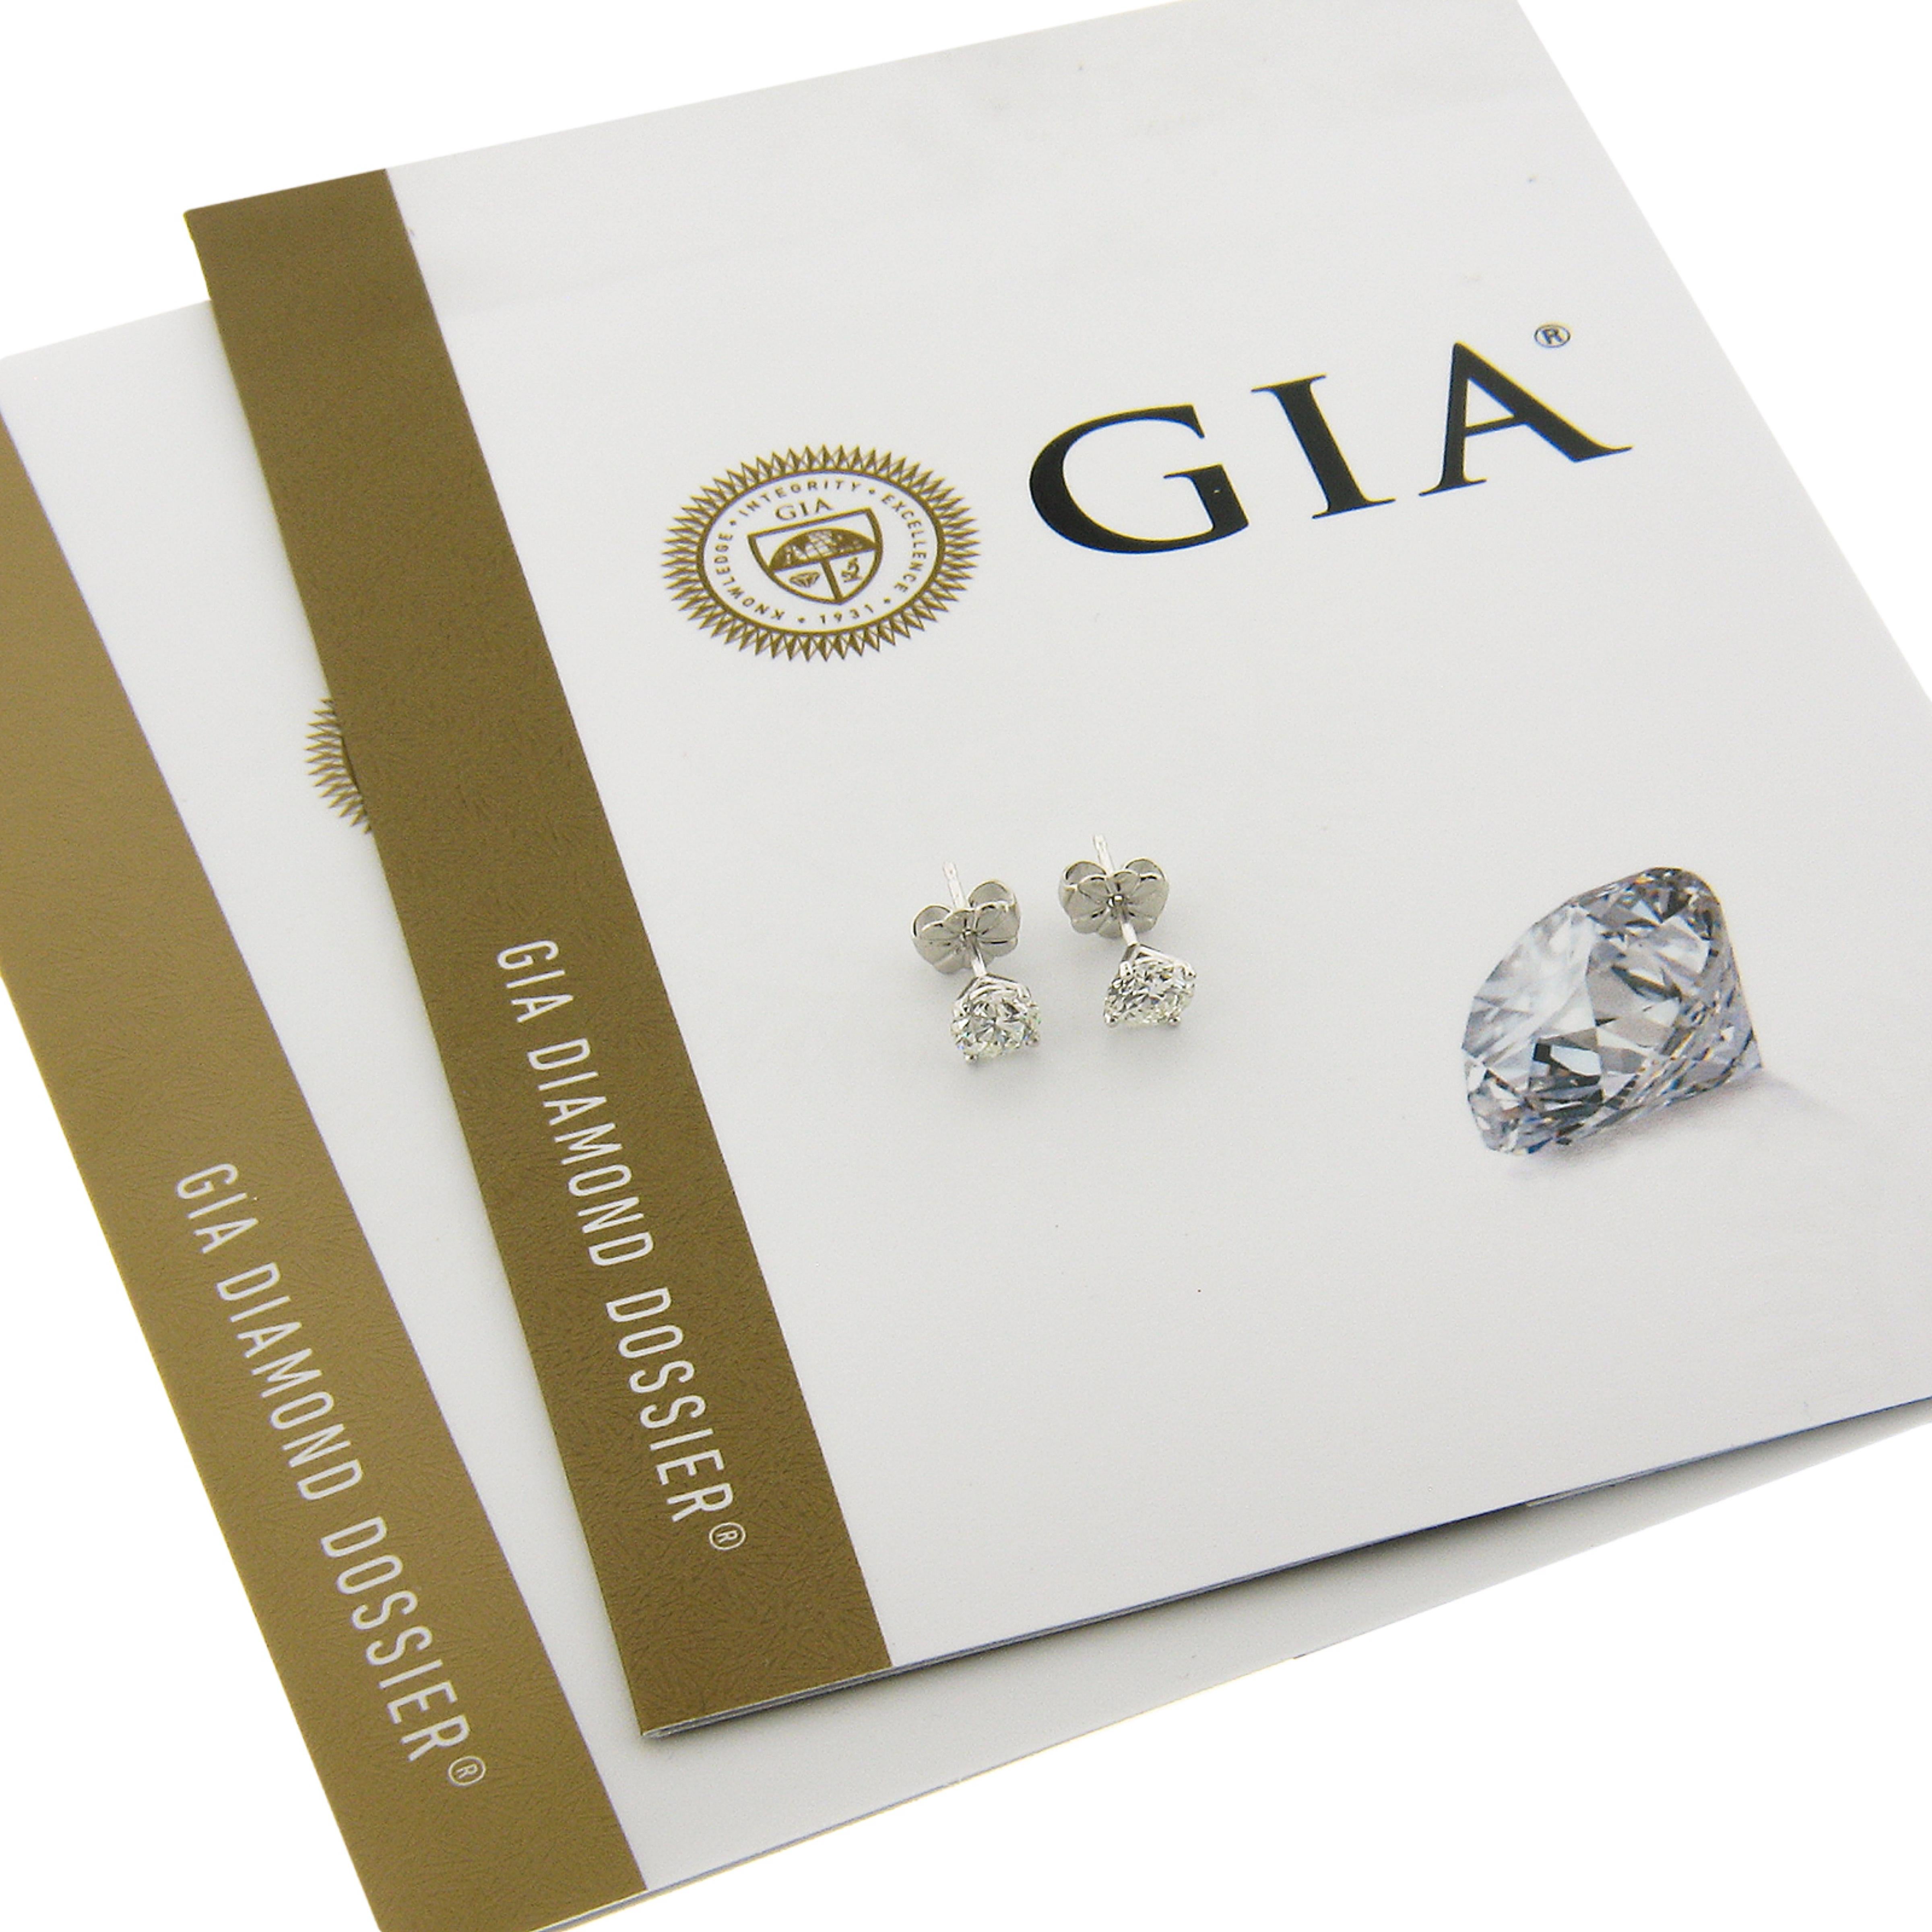 This elegant pair of diamond stud earrings was newly crafted from solid platinum and features two brilliant and fiery, GIA certified round diamonds. These very fine quality diamonds total exactly 1.02 carats in weight and they come with the original